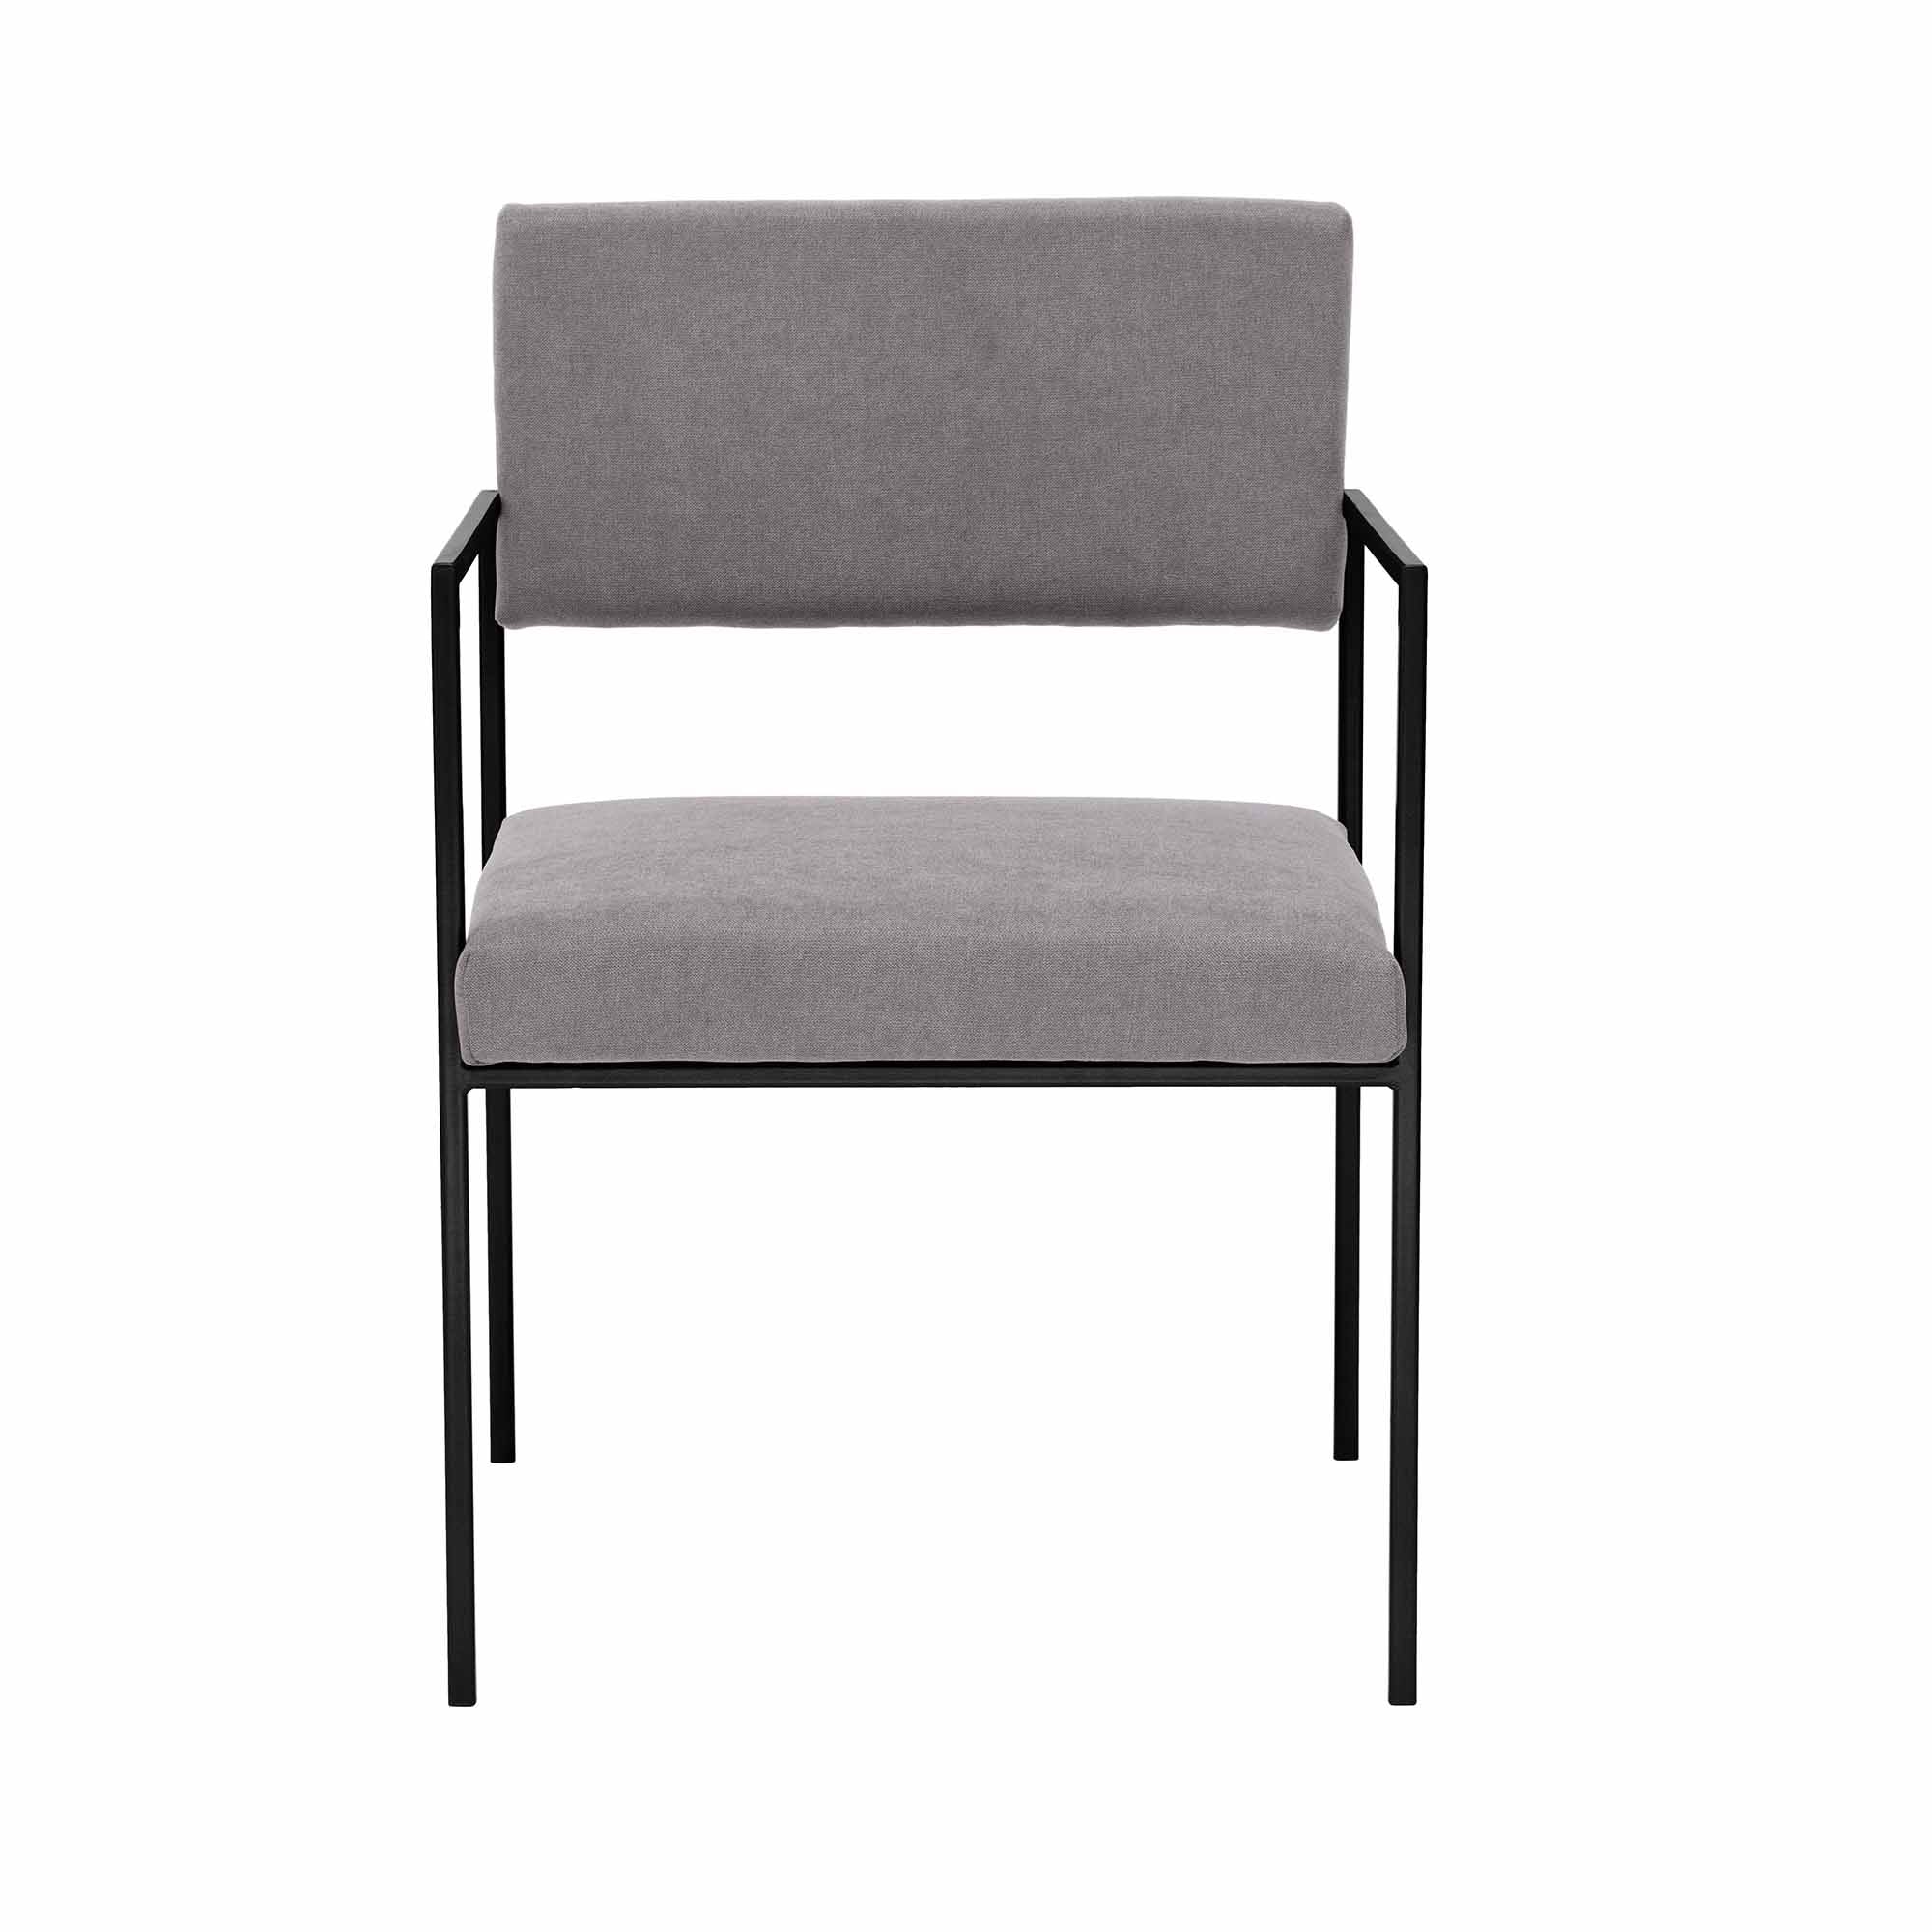 CUBE Armchair, Powder-Coated Steel Frame front view grey fabric, black frame